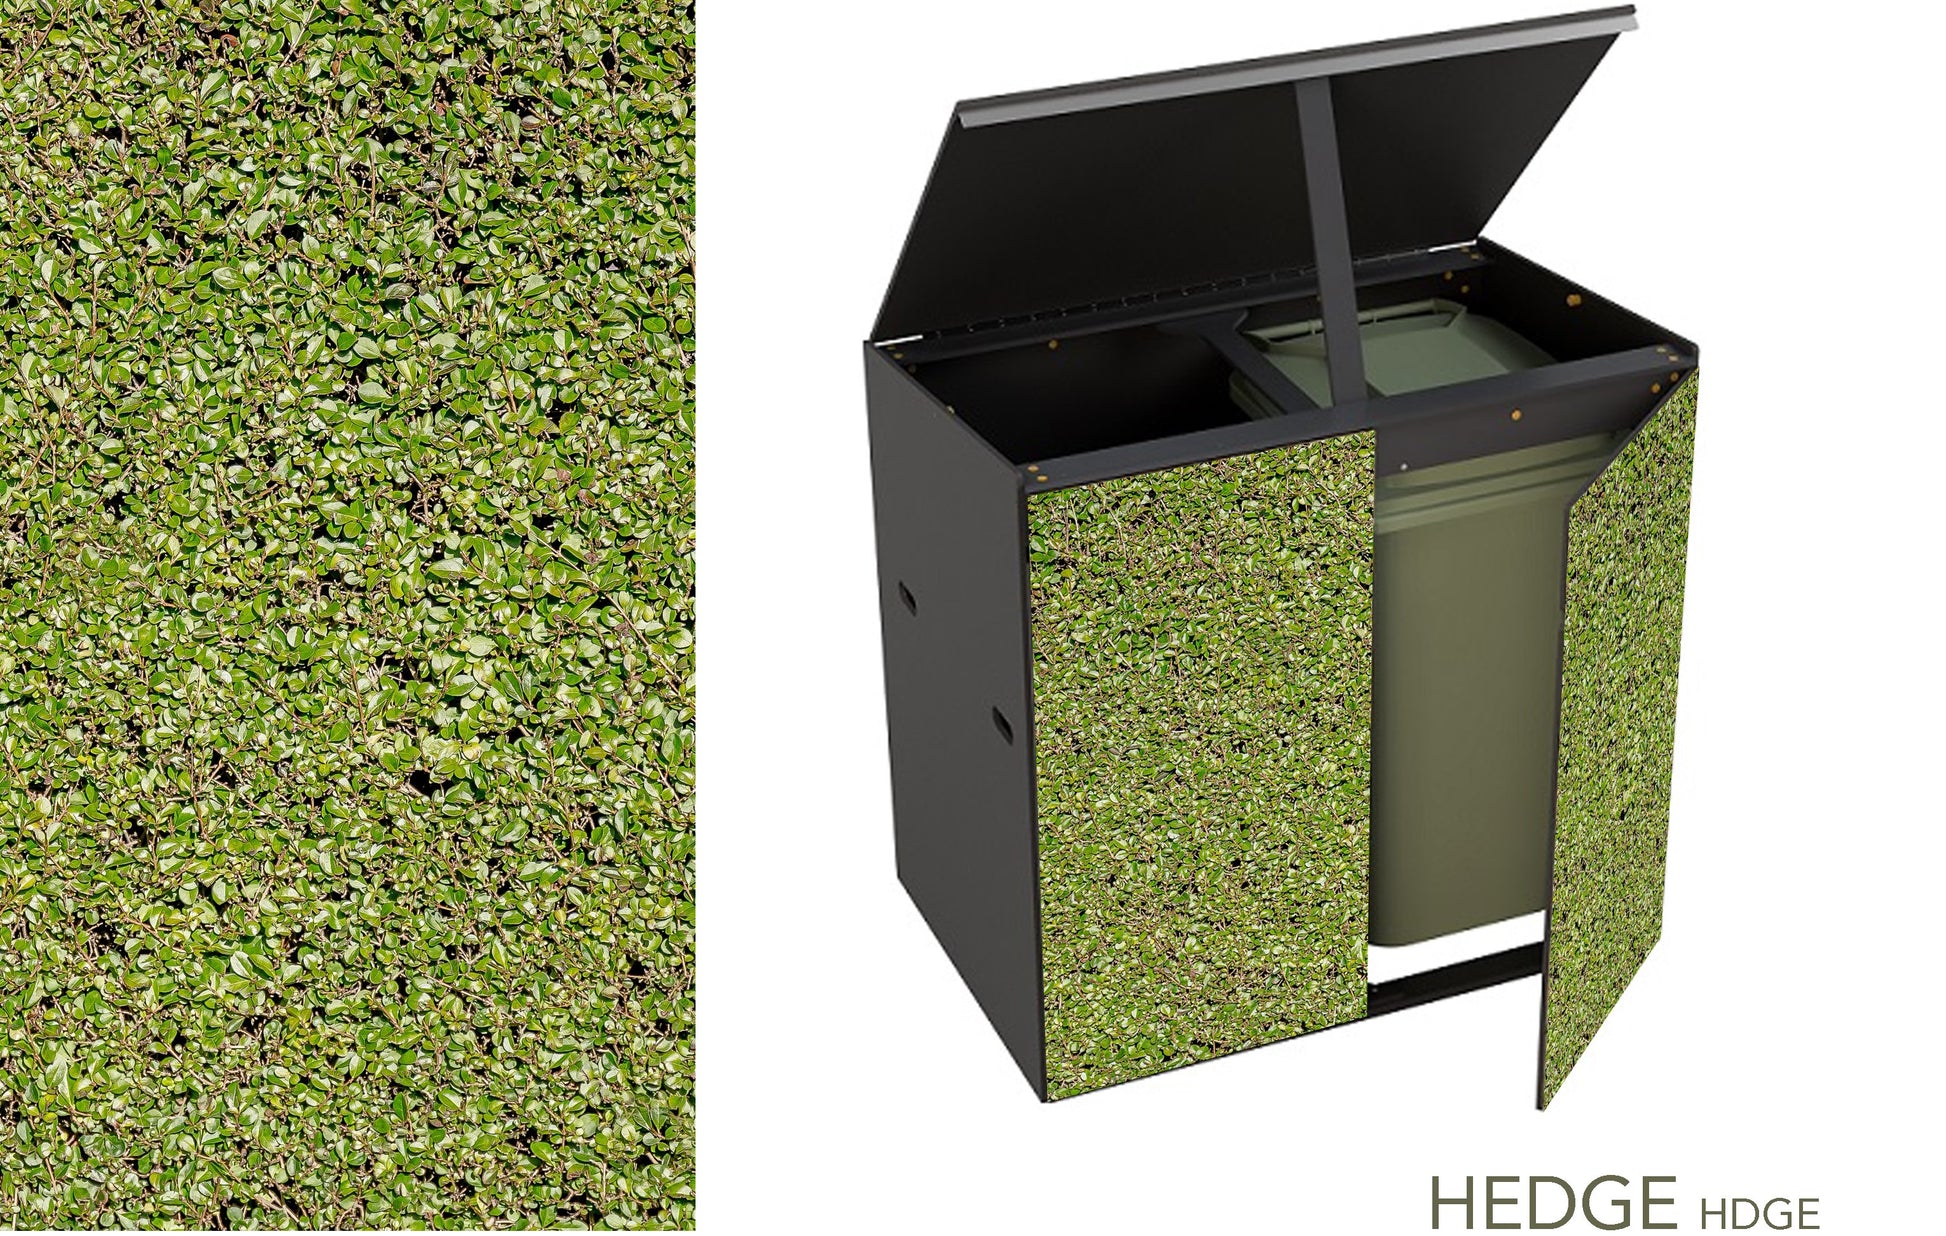 As before a 2 bin storage unit featuring a life sized hedge photograph.  This picture shows the lid propped open and one door ajar to reveal a green wheelie bin inside the store.